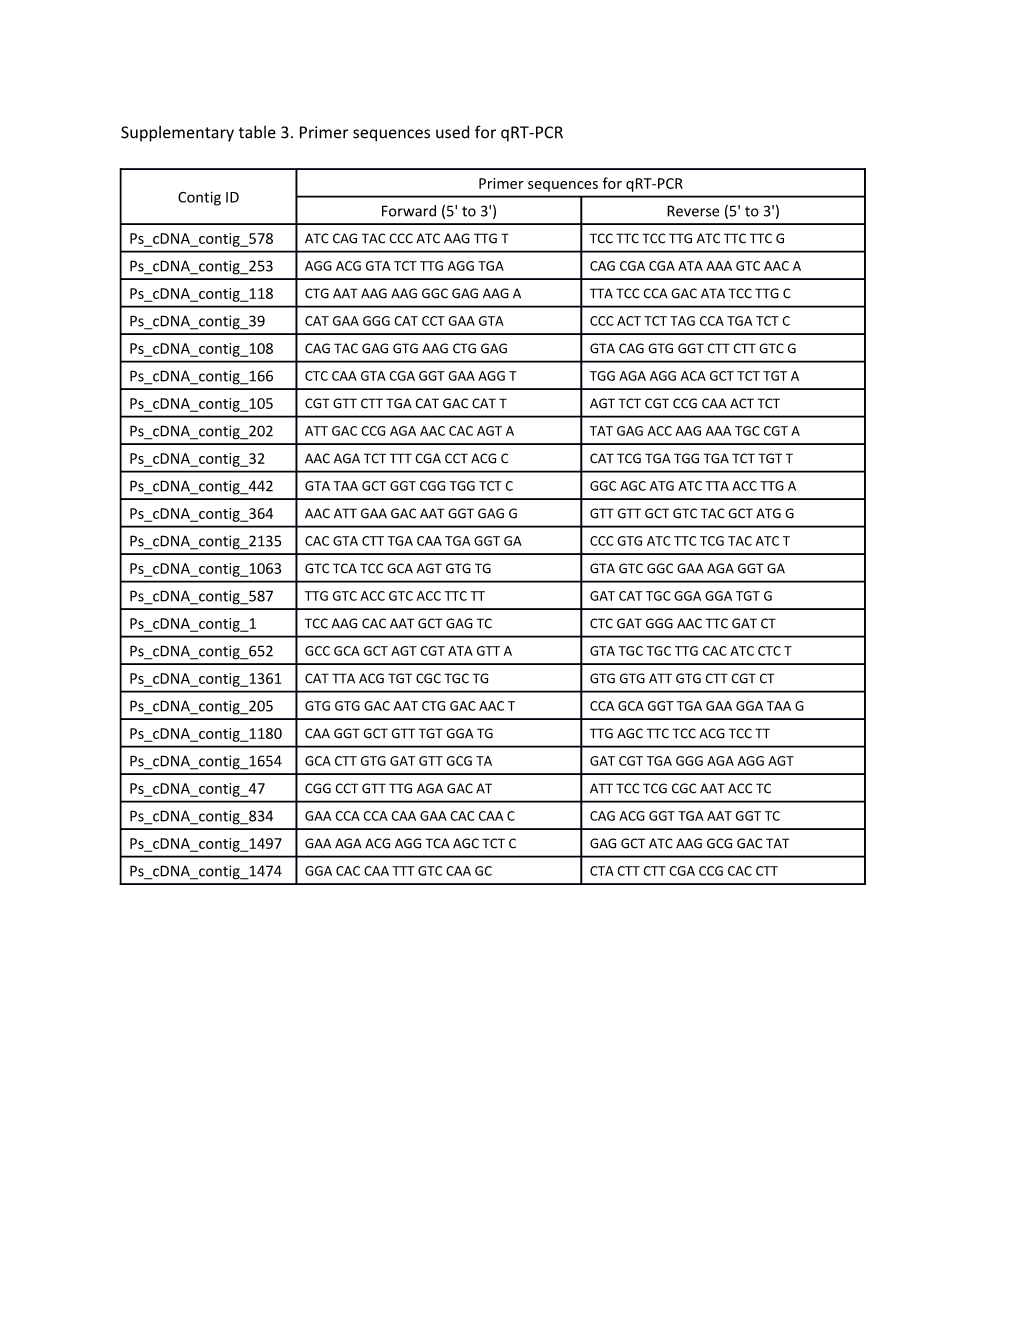 Supplementary Table 3. Primer Sequences Used for Qrt-PCR